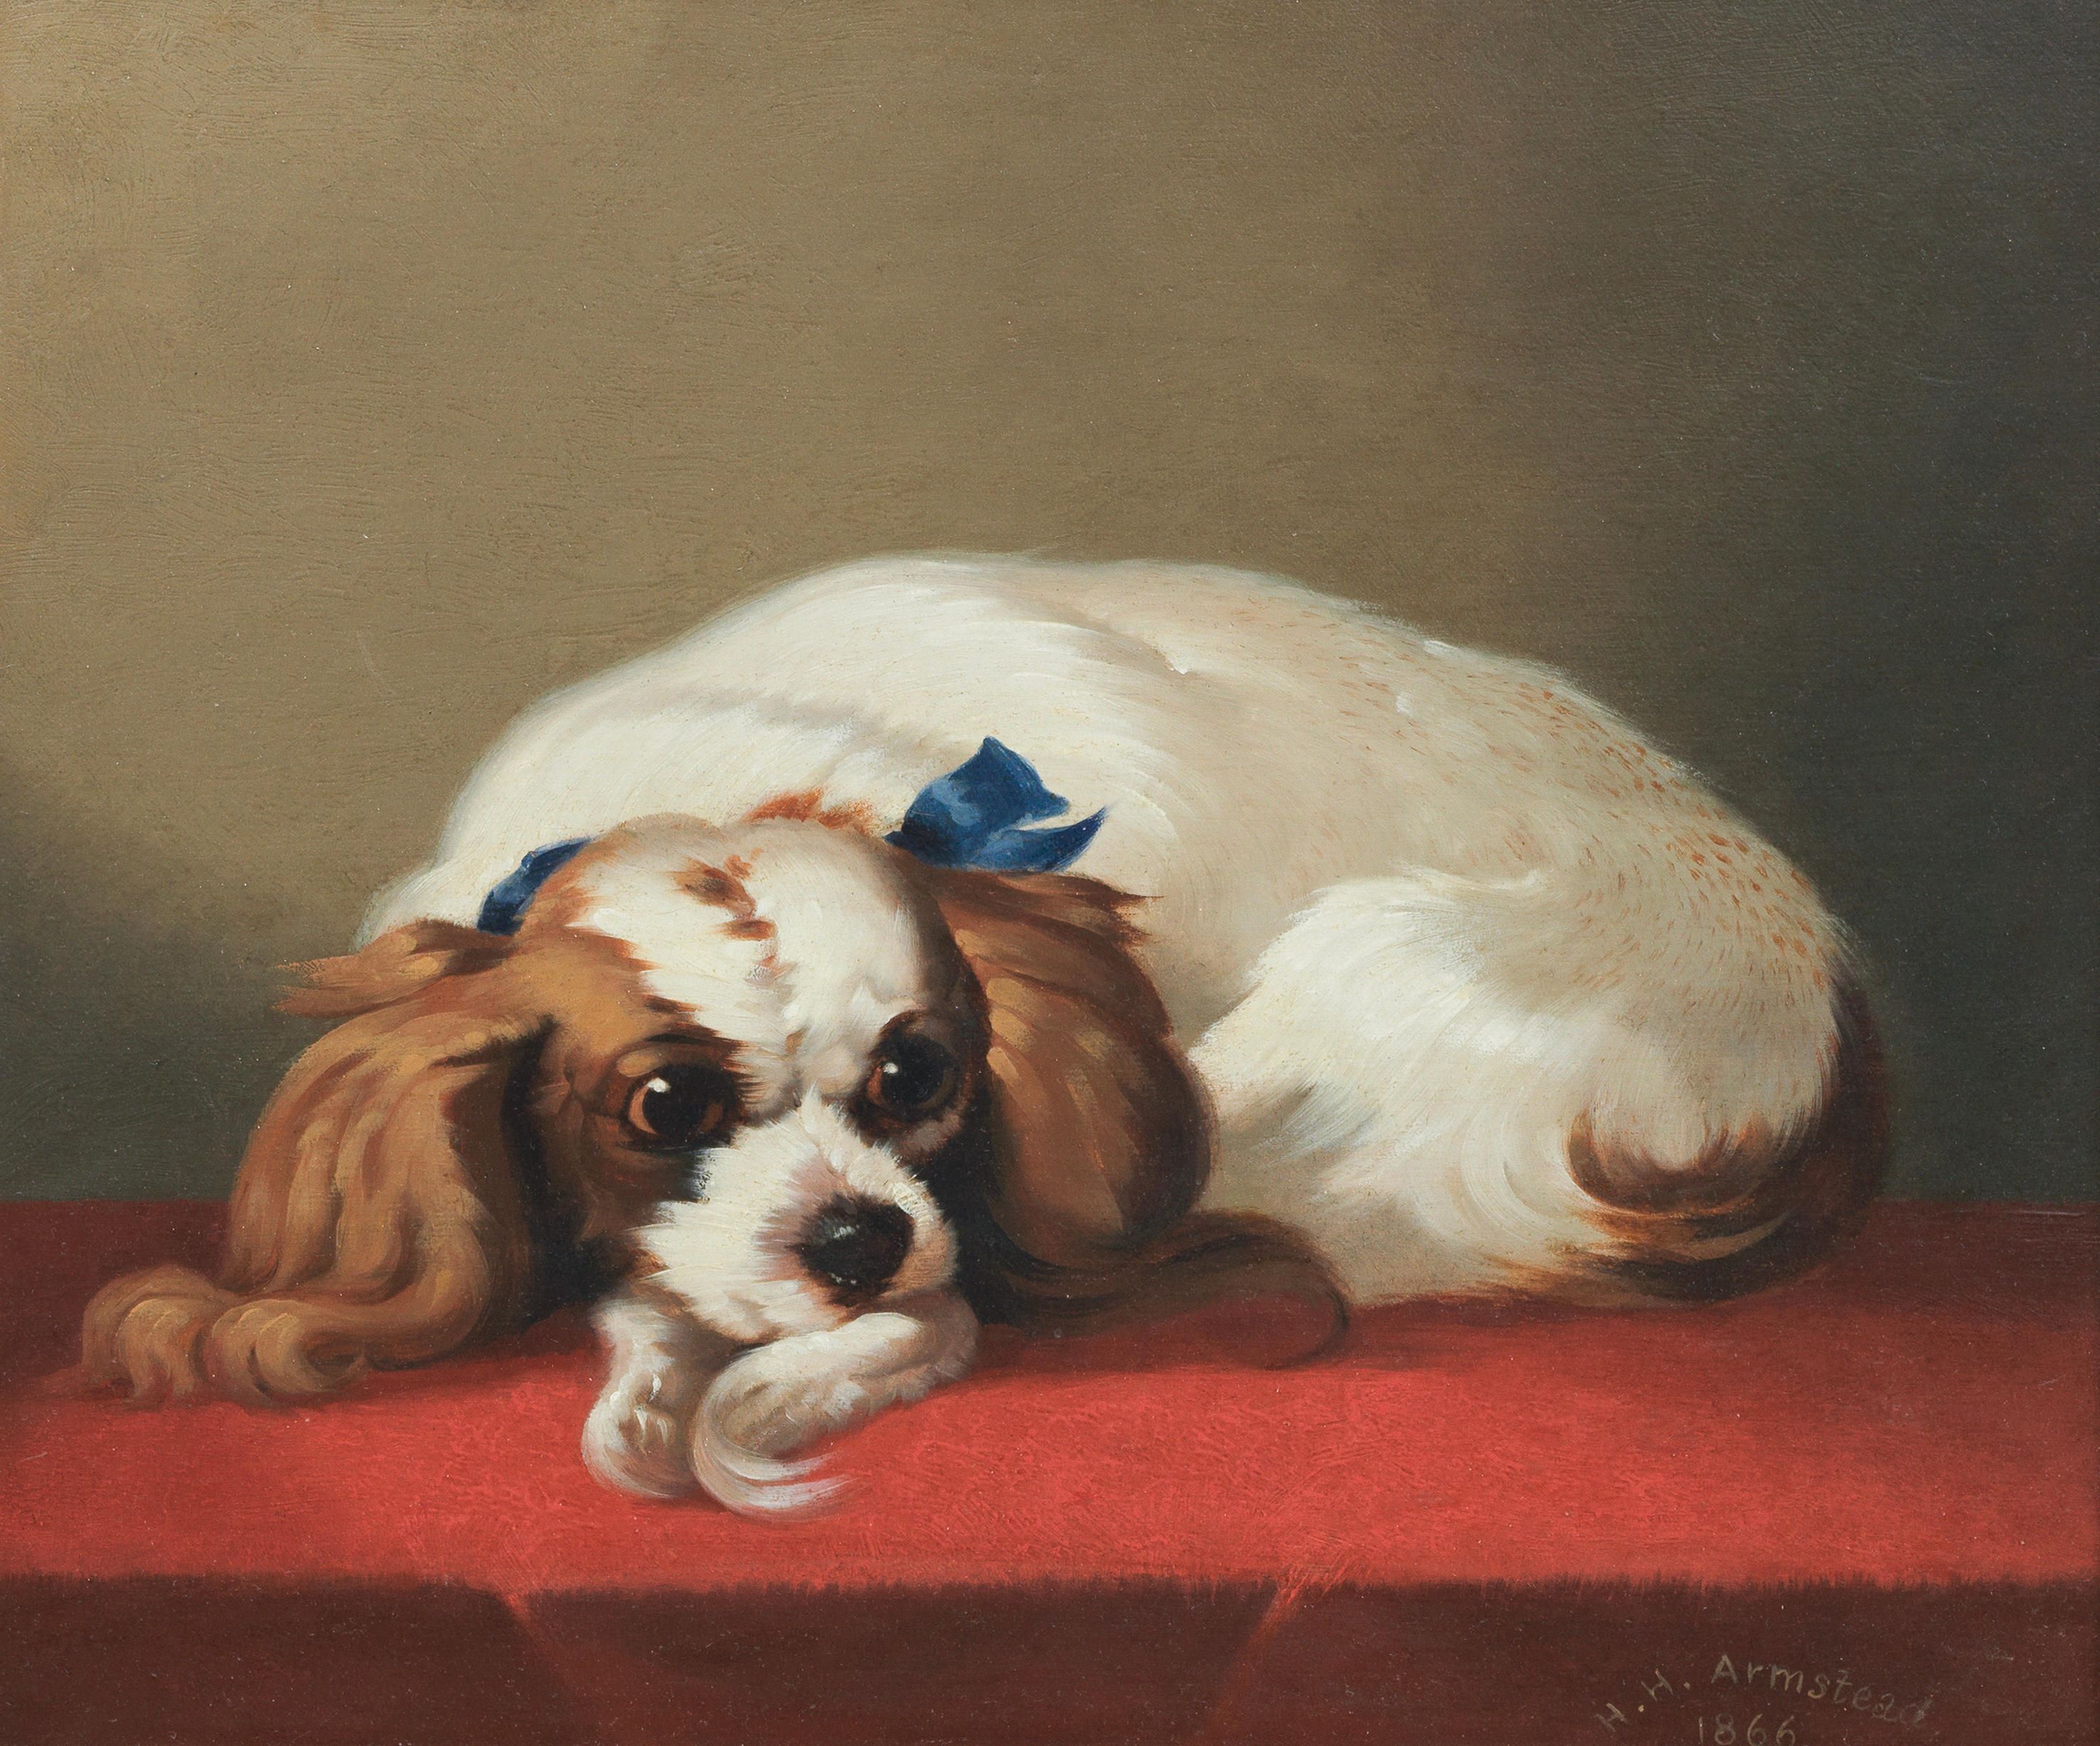 Click for larger image: An oil of a Blenheim King Charles Spaniel Signed by Henry Hugh Armstead RA (English, 1828 - 1905) - An oil of a Blenheim King Charles Spaniel Signed by Henry Hugh Armstead RA (English, 1828 - 1905)